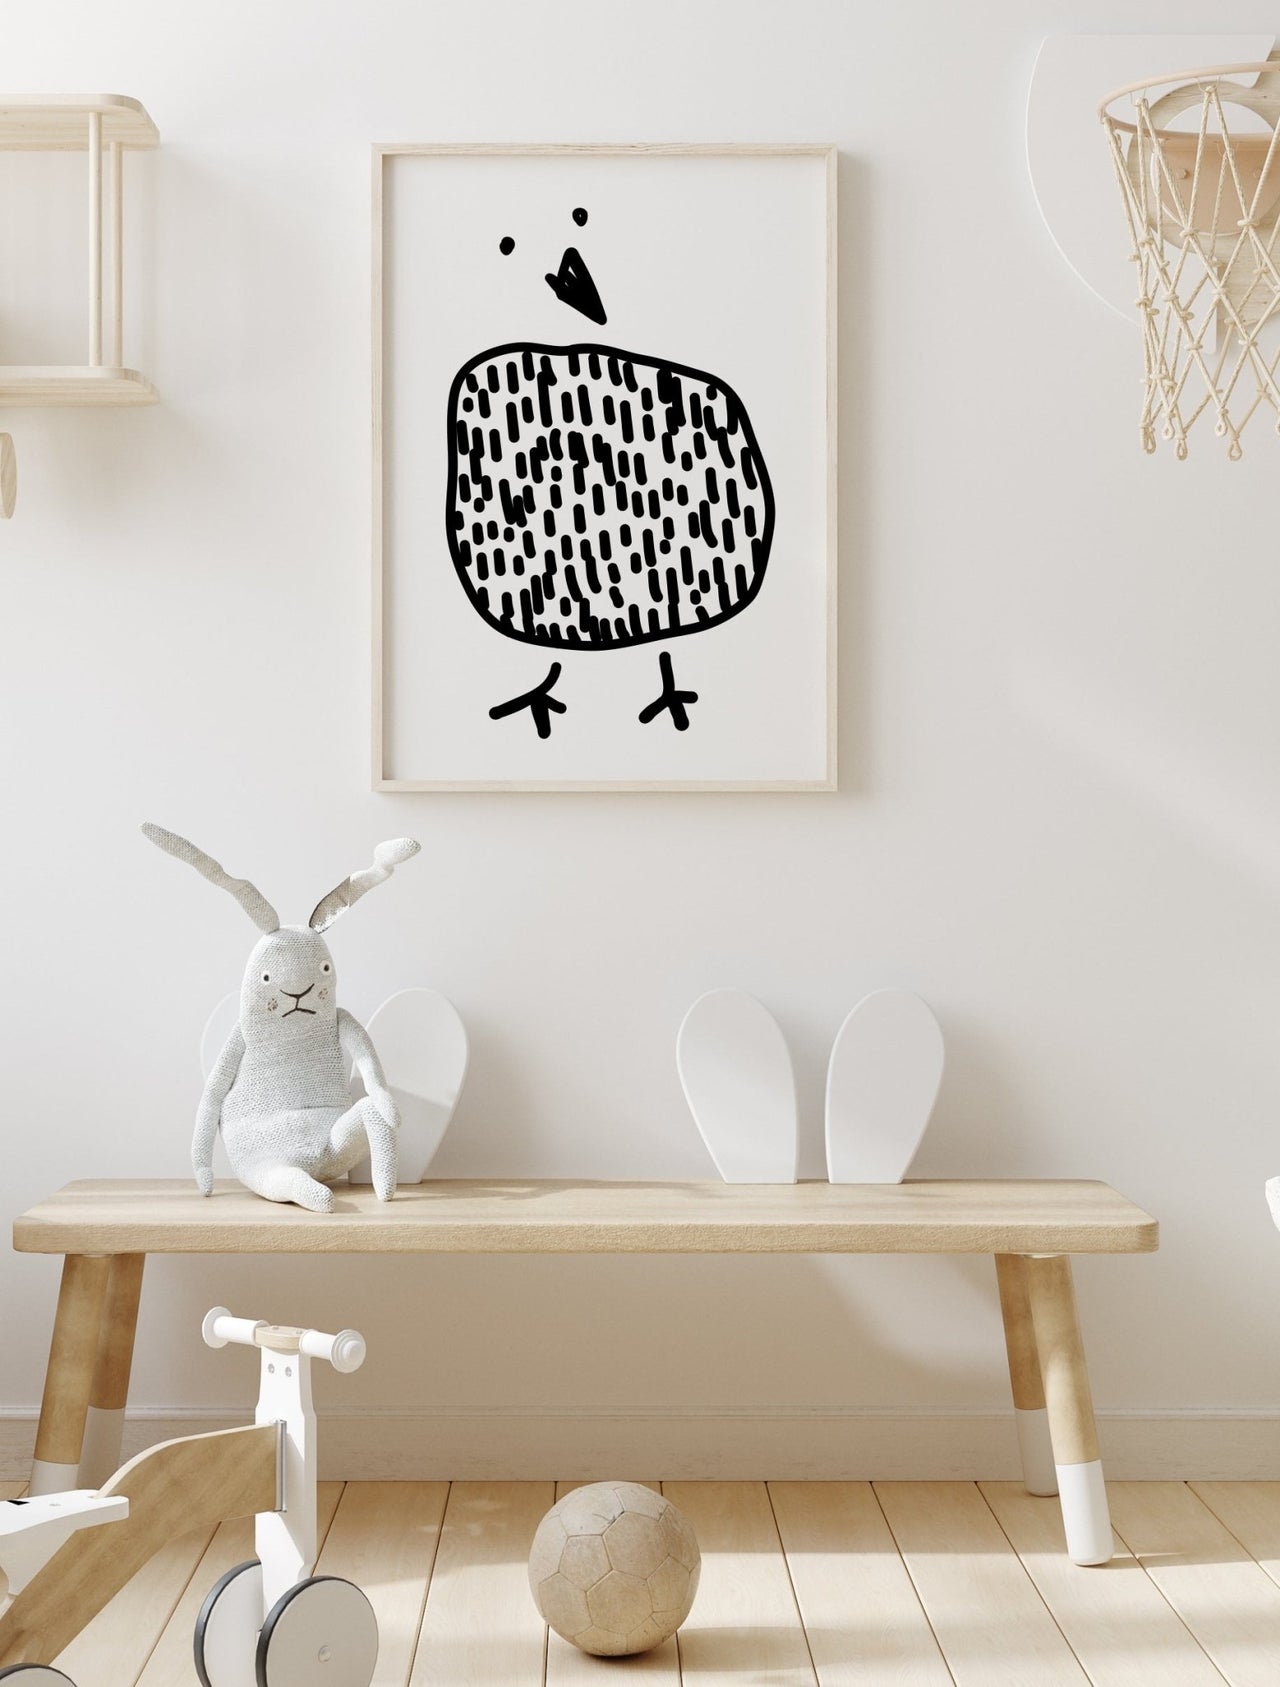 BLACK ILLUSTRATION SPECKLED BIRD GRAPHIC ART PRINT WITH A WHITE BACKGROUND